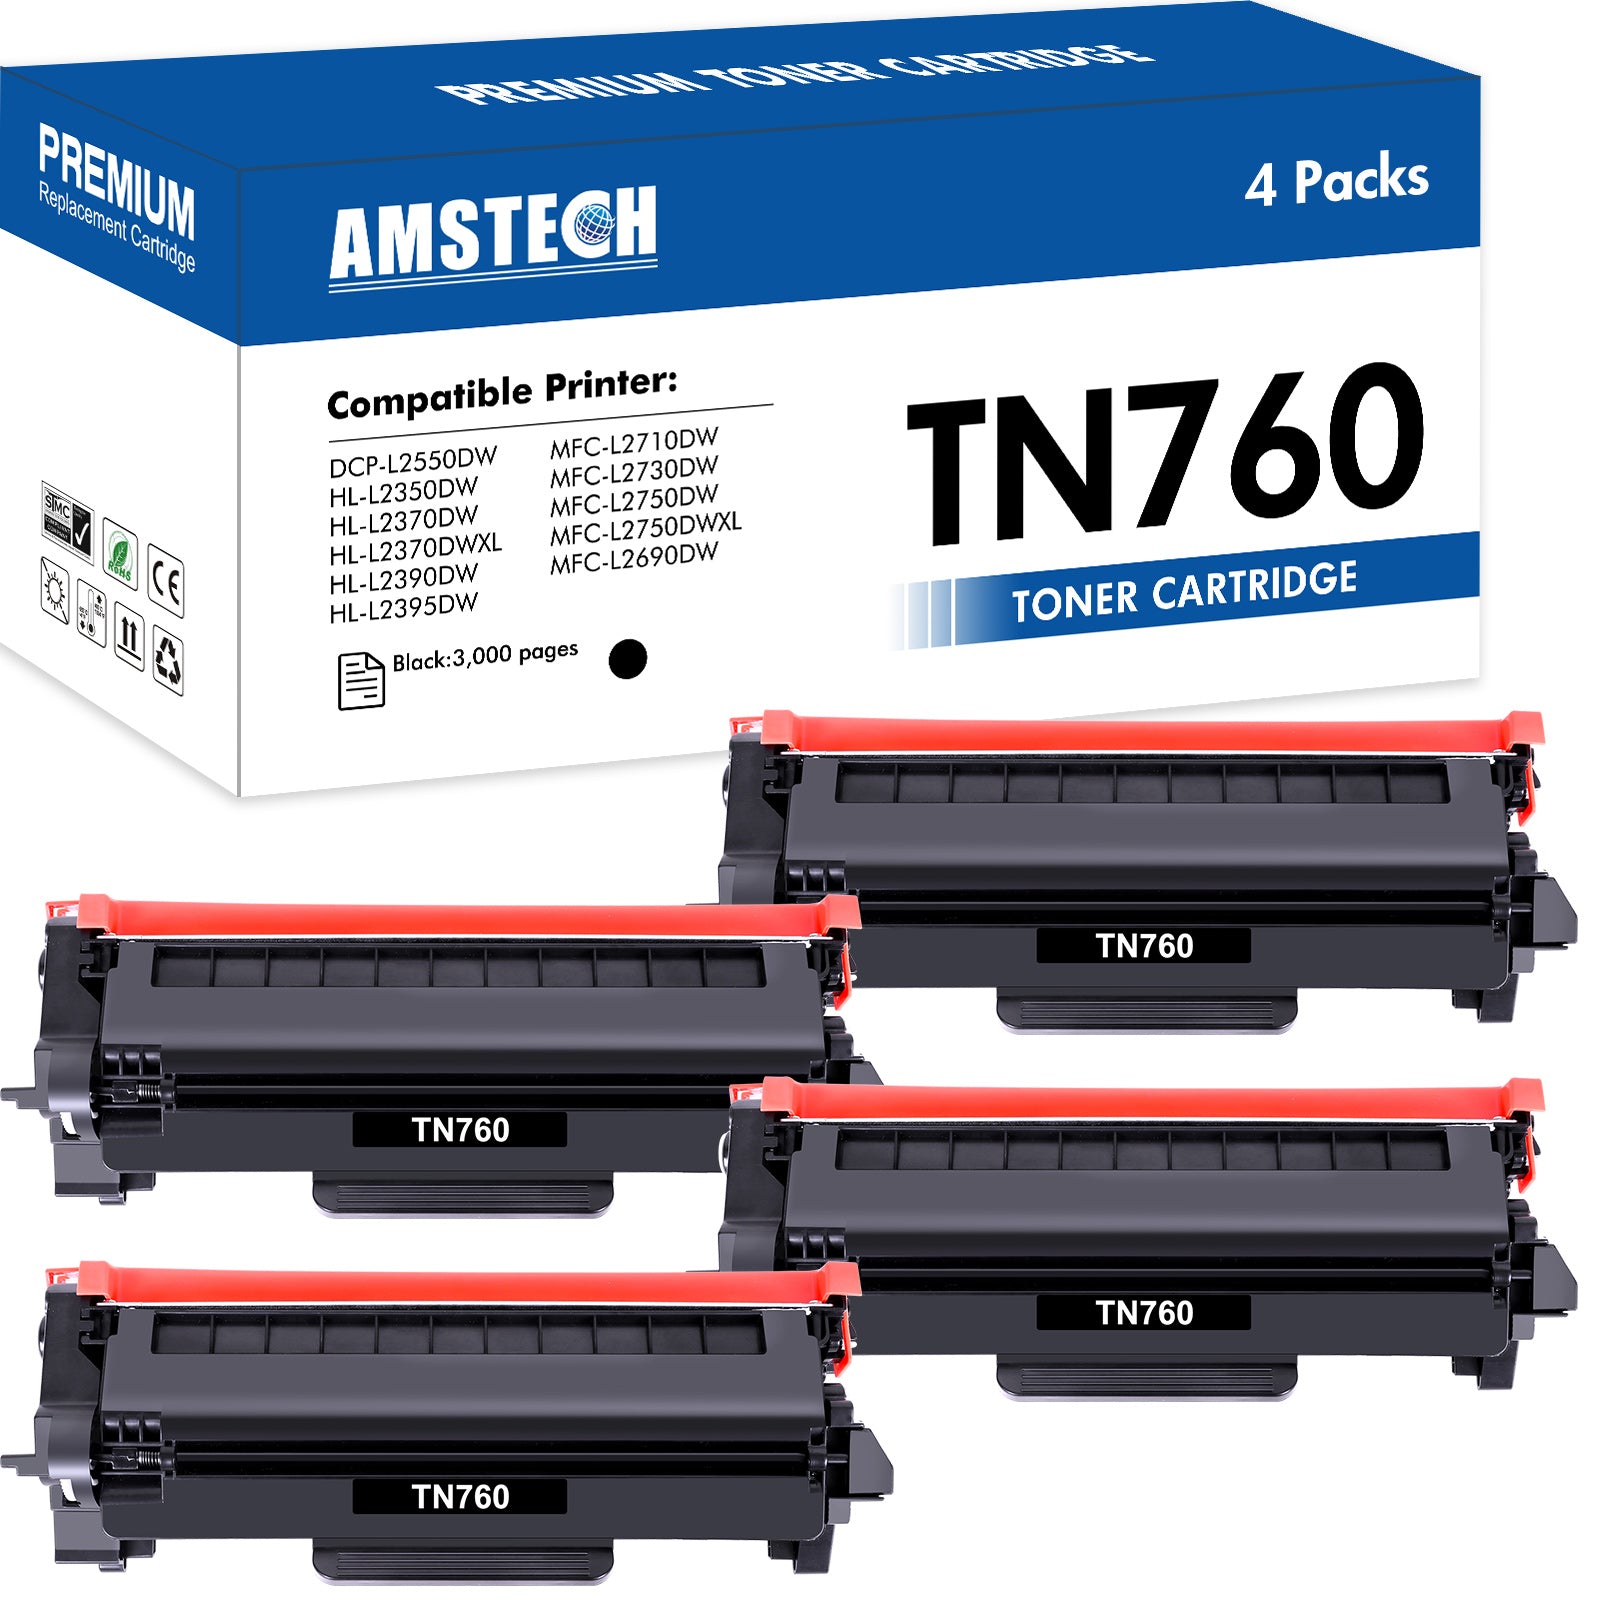 TN760 Toner Cartridge Compatible for Brother TN760 TN730 TN-730/TN-760 TN 760 DCP-L2550DW MFC-L2710DW MFC-L2750DW HL-L2350DW HL-L2395DW MFC-L2750DW Printer Ink (Black, 4-Pack)